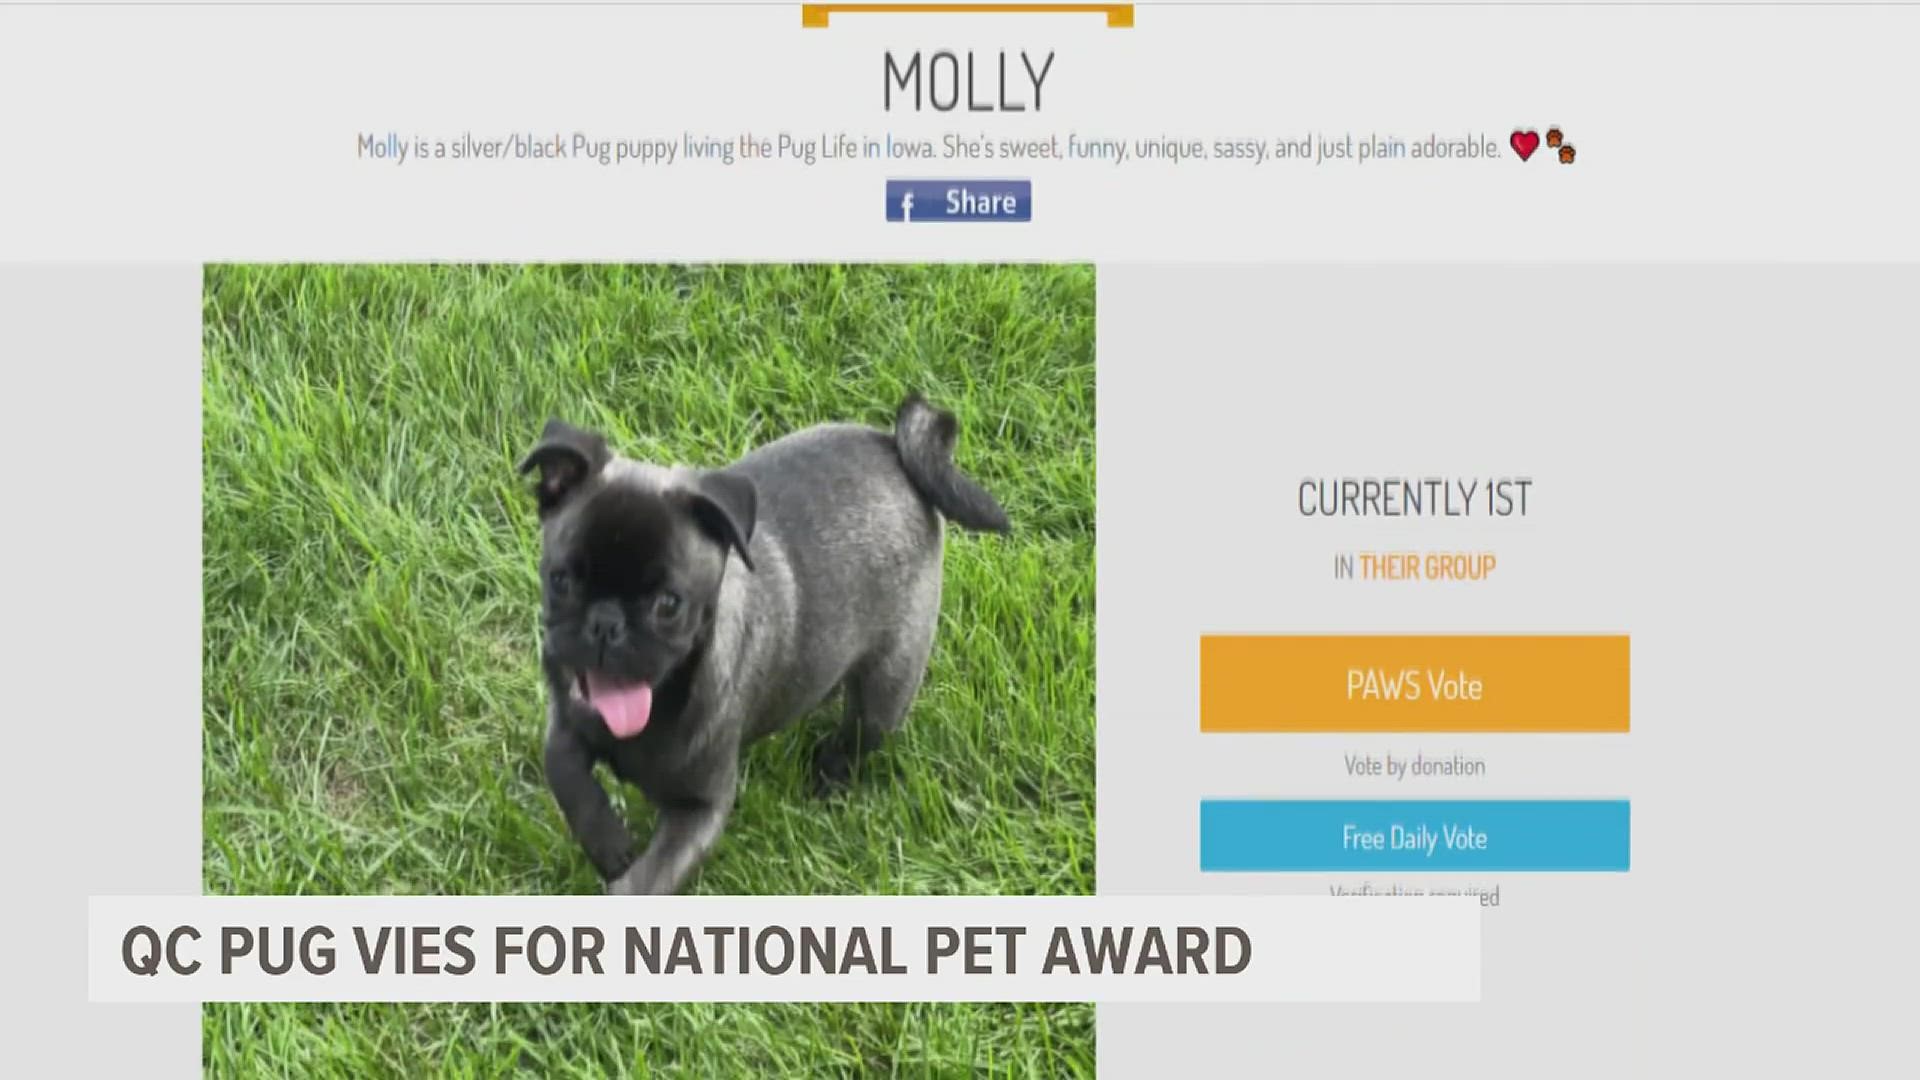 Molly is a black Pug puppy that's sweet, funny and cute as a button. But can she win a national competition to be America's favorite pet?